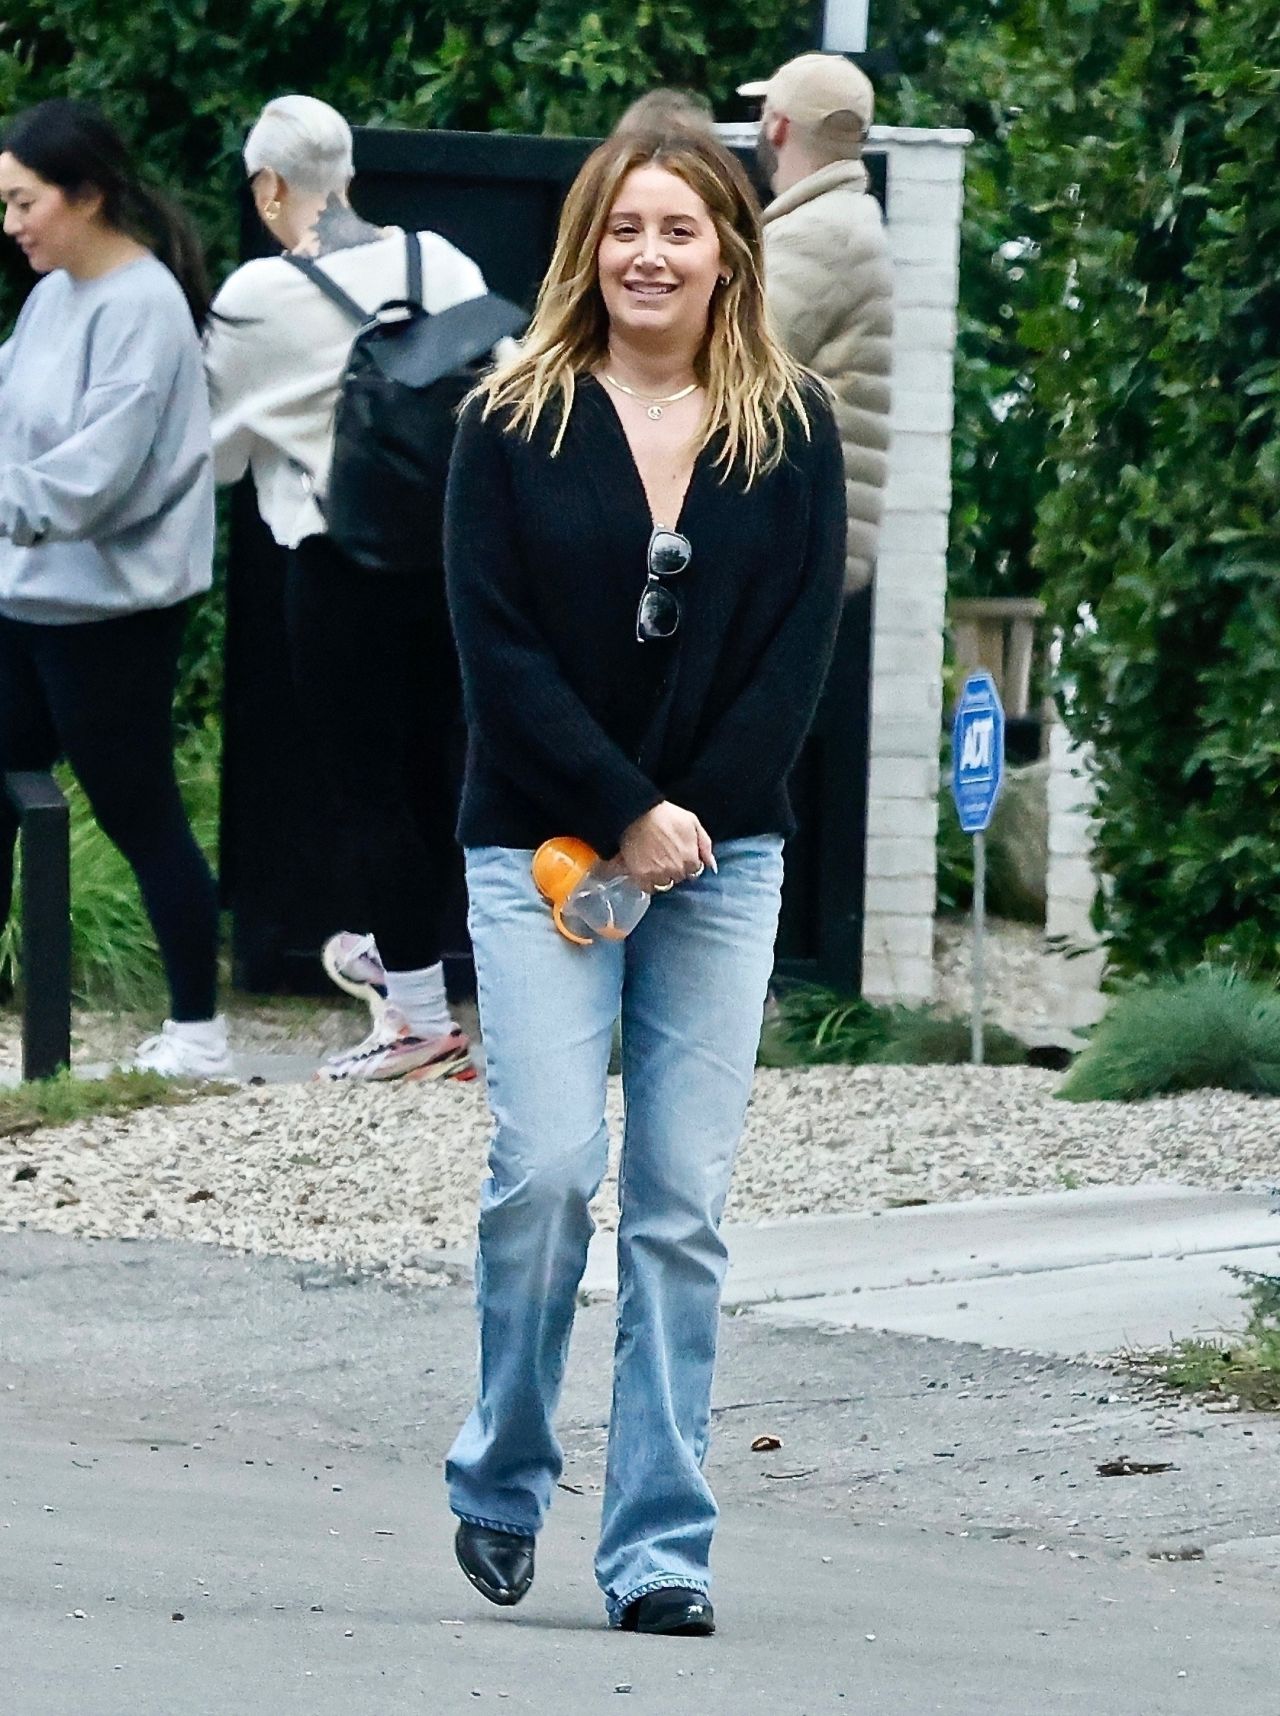 Ashley Tisdale Studio City August 17, 2012 – Star Style